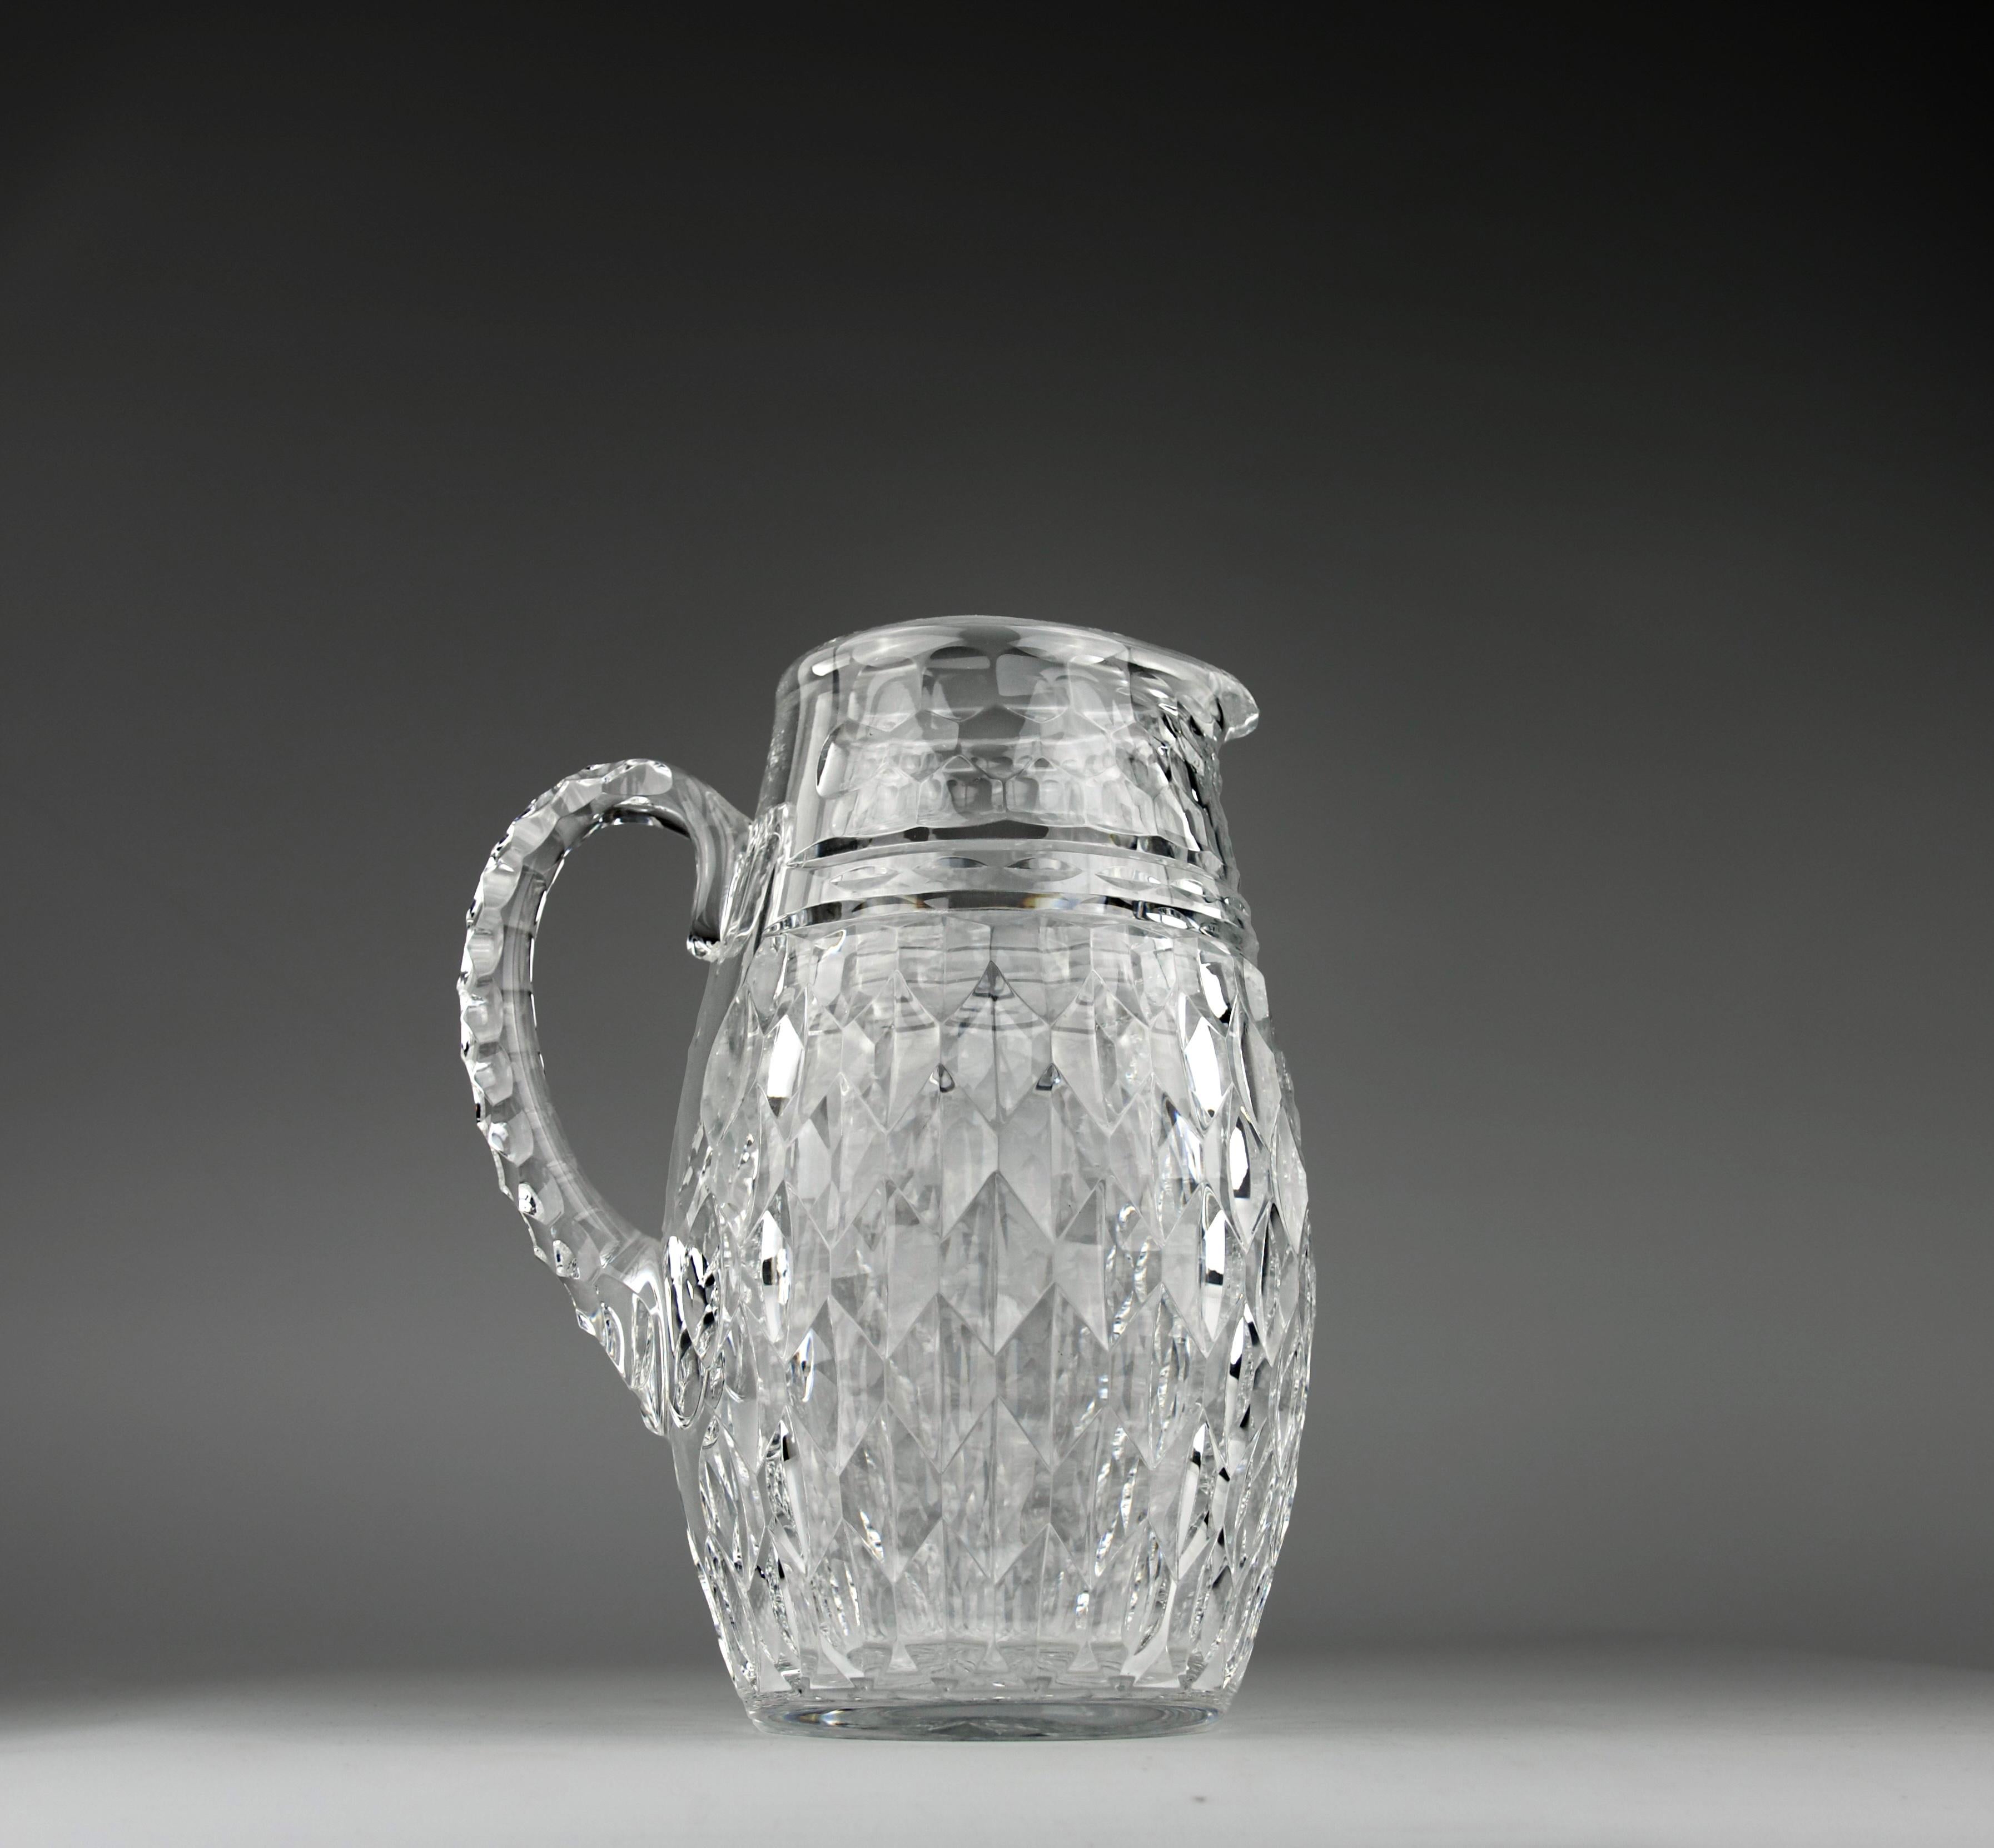 Superb carafe with decorations of hand cut honeycomb pattern in Baccarat crystal. Stamped by the manufacture.

Excellent condition.

Dimensions in cm ( H x L x l ) : 21.5 x 16.5 x 12

Secure shipping.

Since 1764 Baccarat has written the